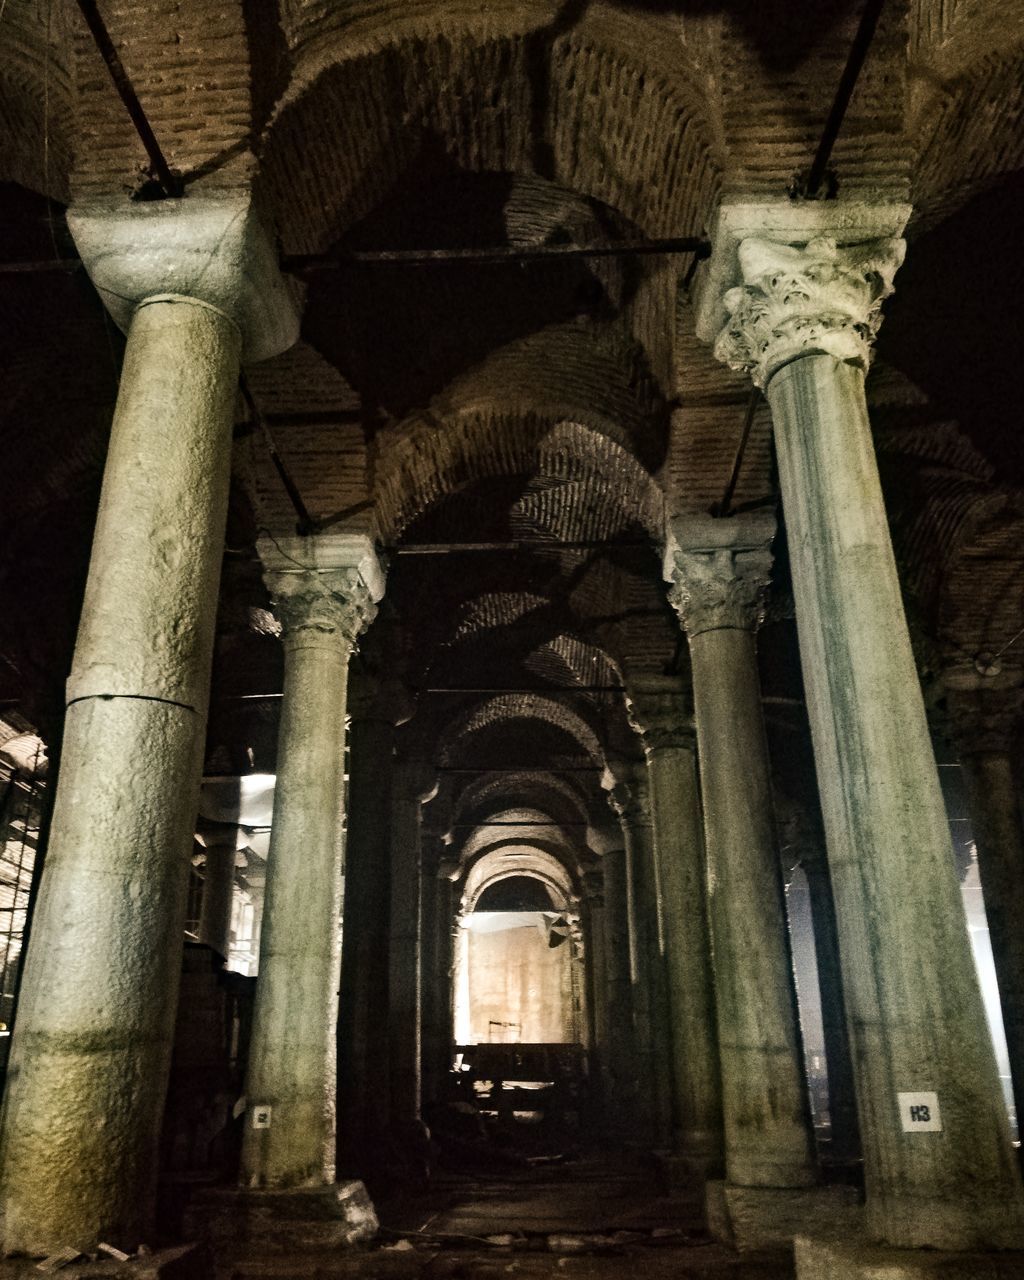 LOW ANGLE VIEW OF COLUMNS IN OLD BUILDING